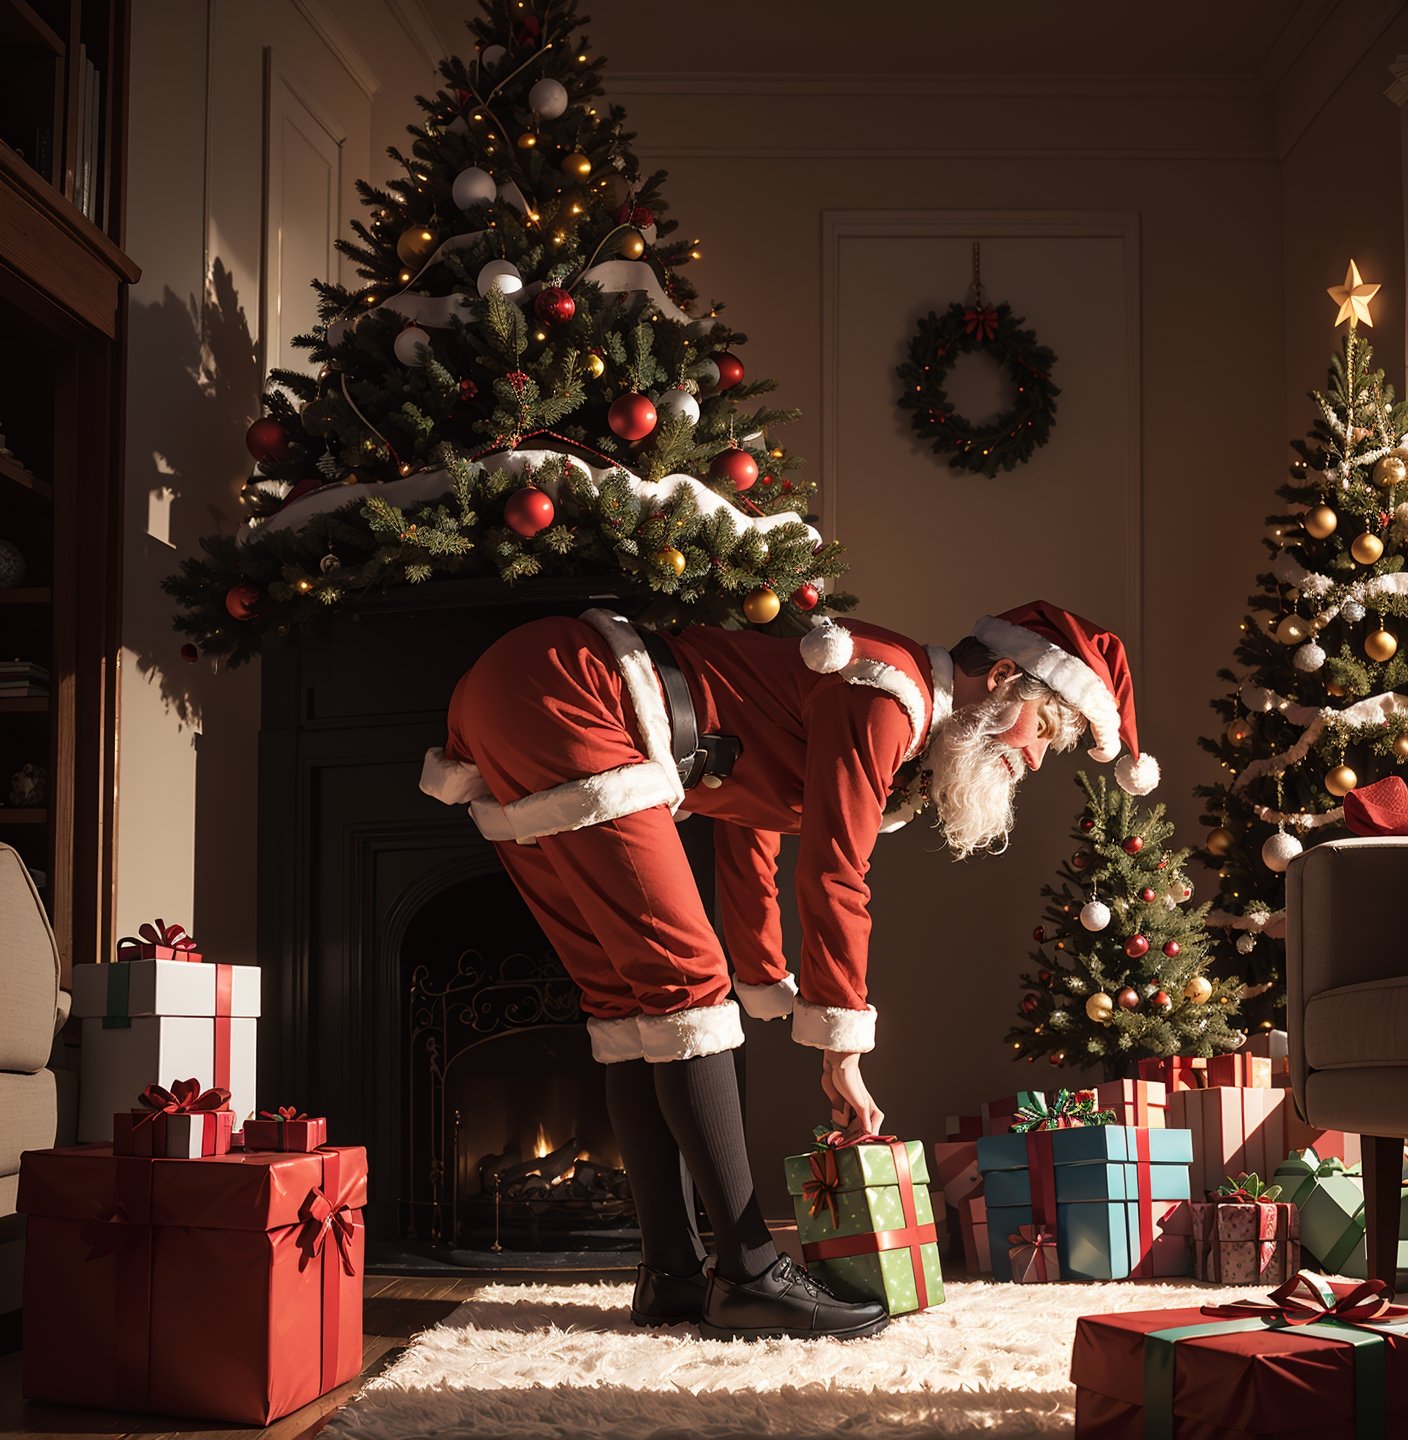 (masterpiece),((best quality)),(ultra detailed),(Santa Claus bent over and placing gift under the tree),(Santa Claus),(Christmas Tree),(Presents),(((Presents))), cozy living room,Best illustration,ultra-high resolution,wallpaper,UHD,Santa Claus focus,Indirect lighting, ((beautiful)),More Detail,(front view),Illustration,